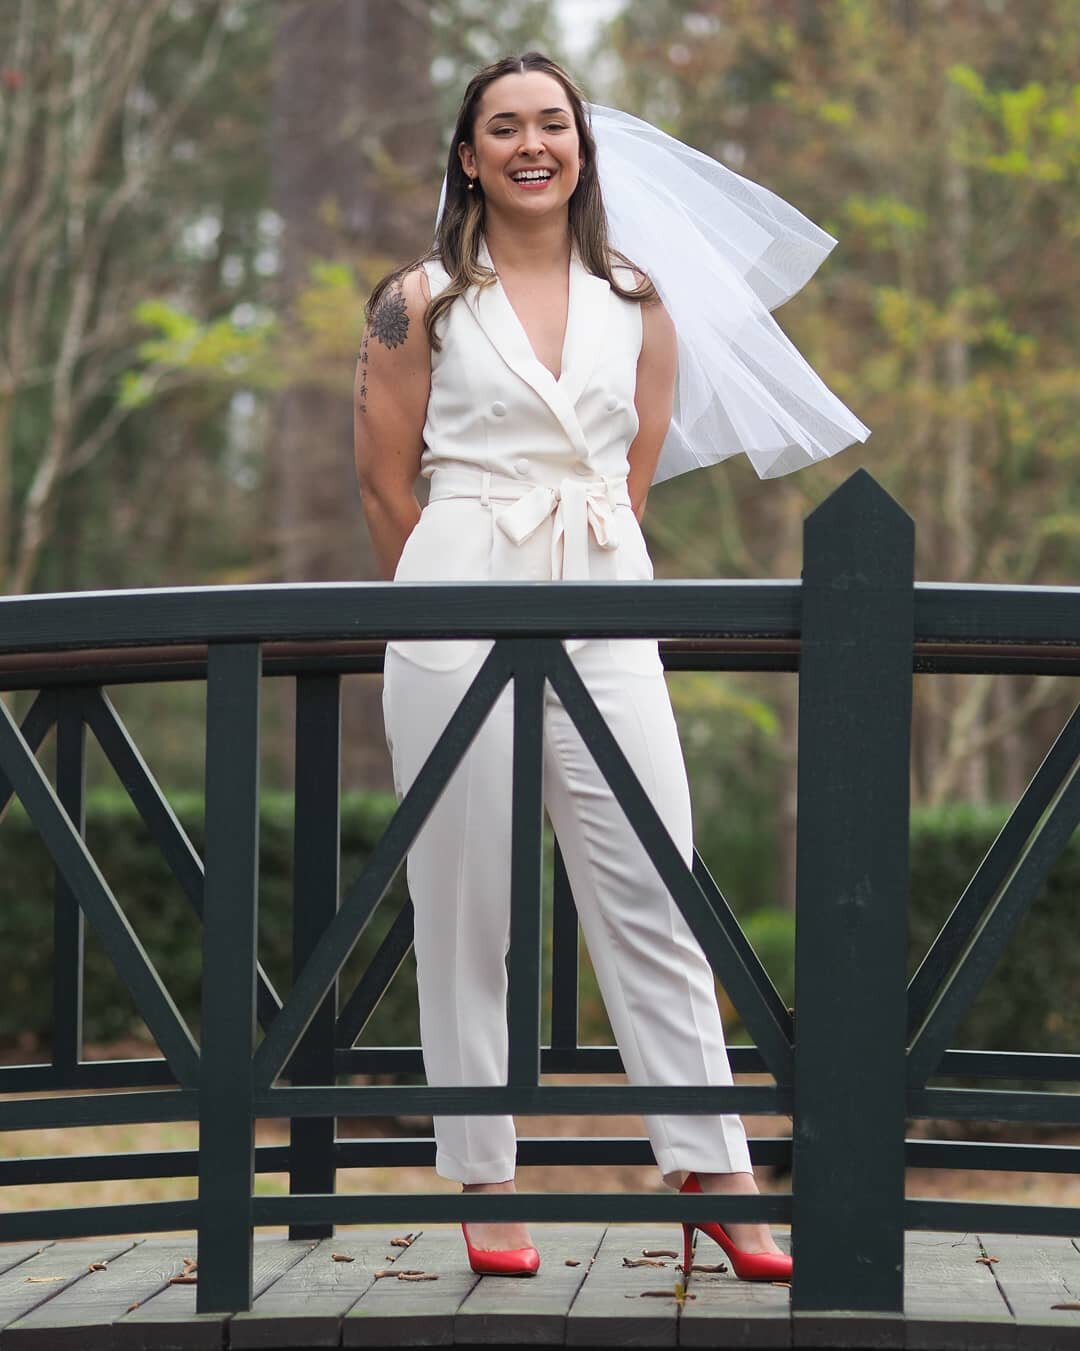 Love this wedding outfit! Love brides who think out of the box  Great little wedding at the Kenan Chapel. Small, only immediate family but very meaningful. Small intimate wedding may be the new norm. Maybe a good thing going forward? 
#kenanchapelatl